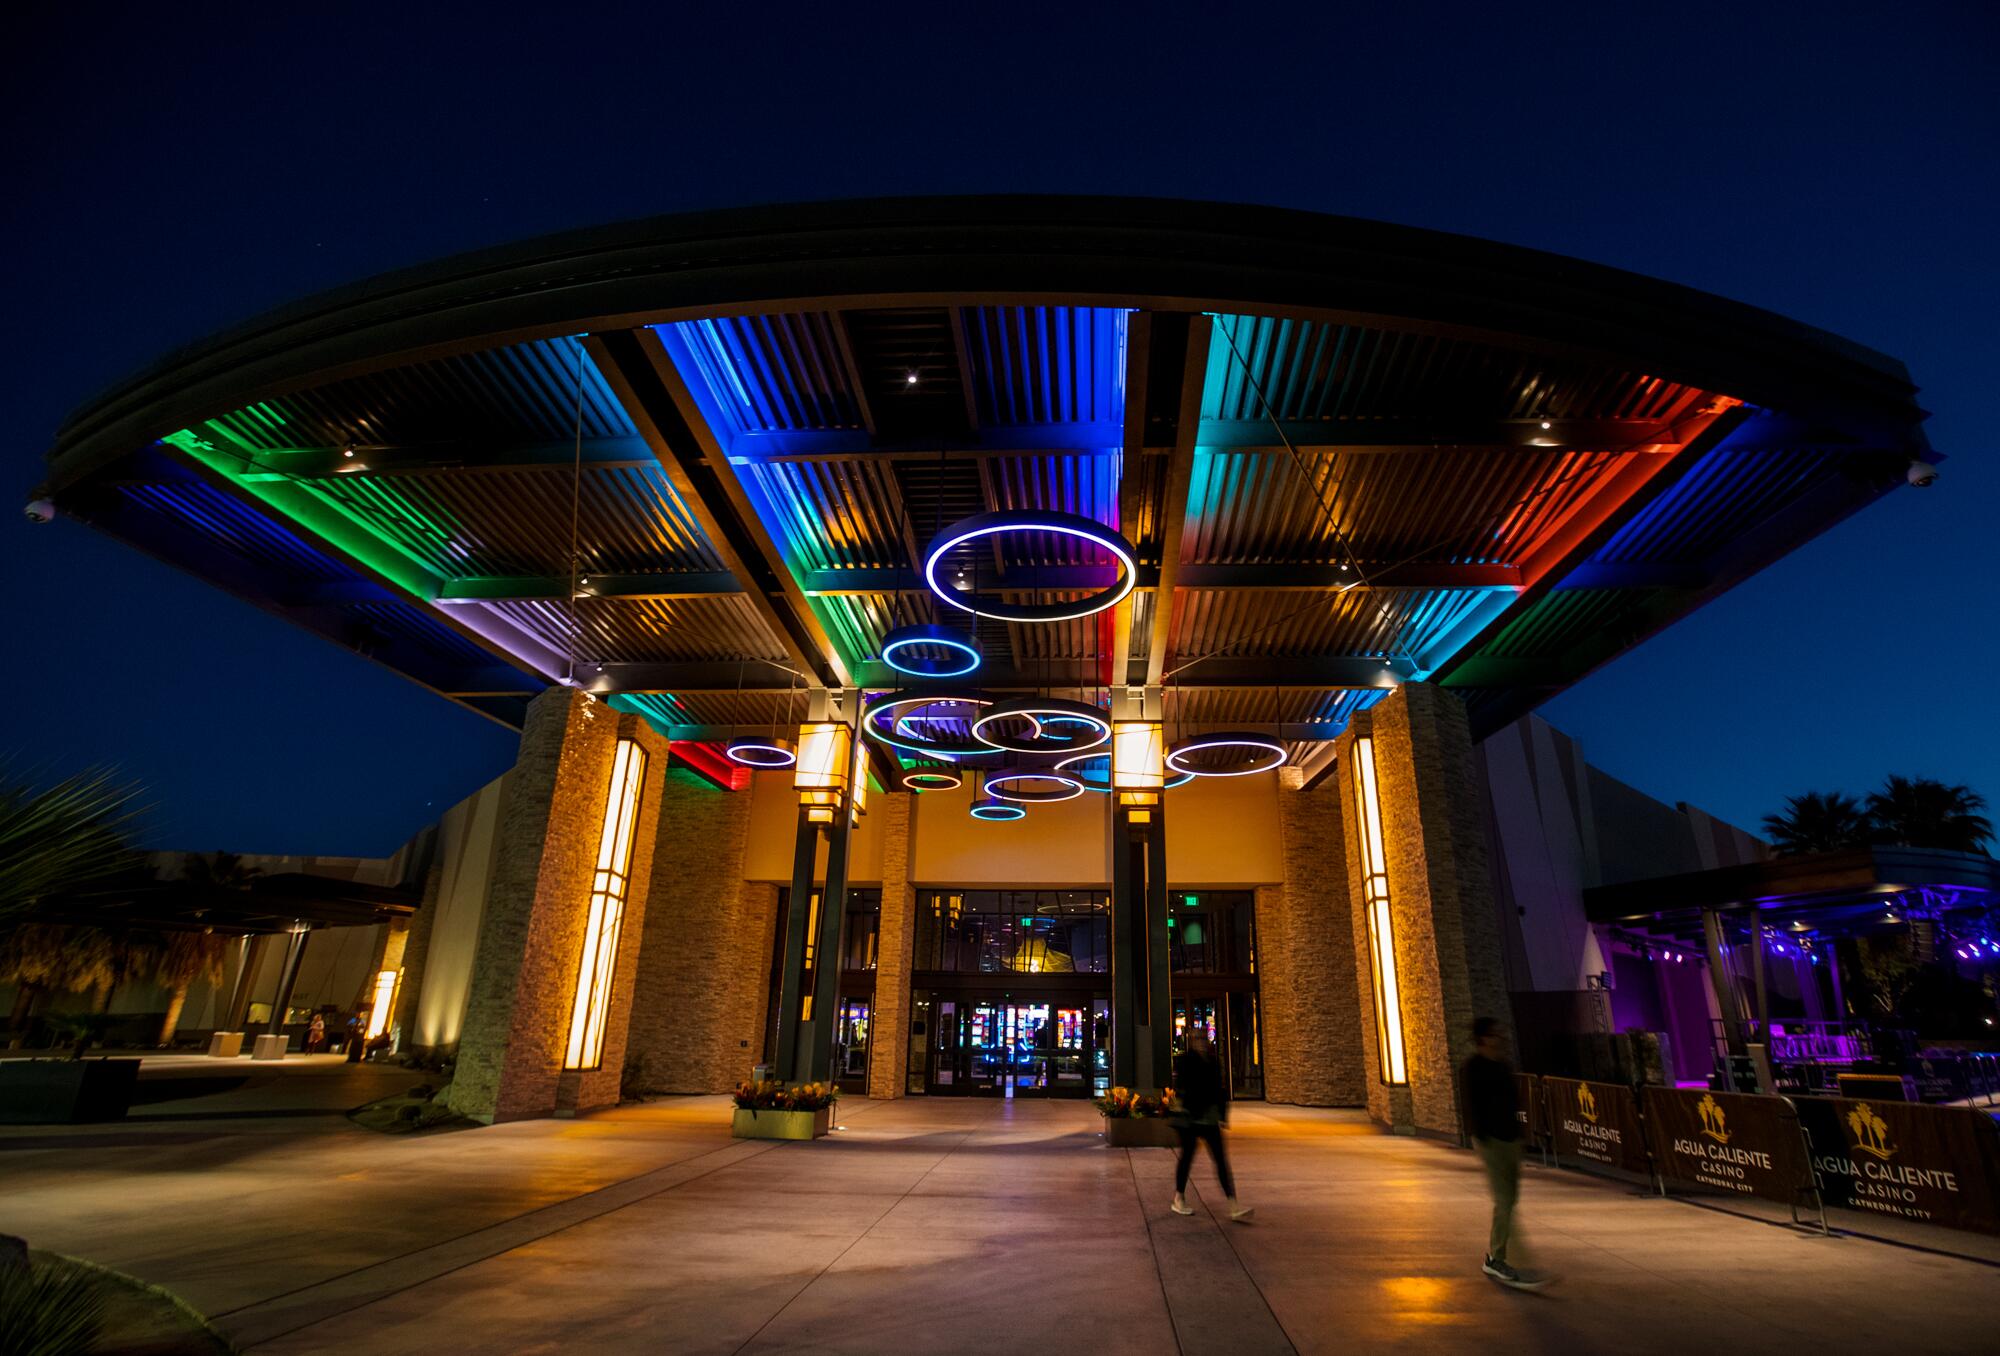 The front entrance to Agua Caliente Casino in Cathedral City, Calif.